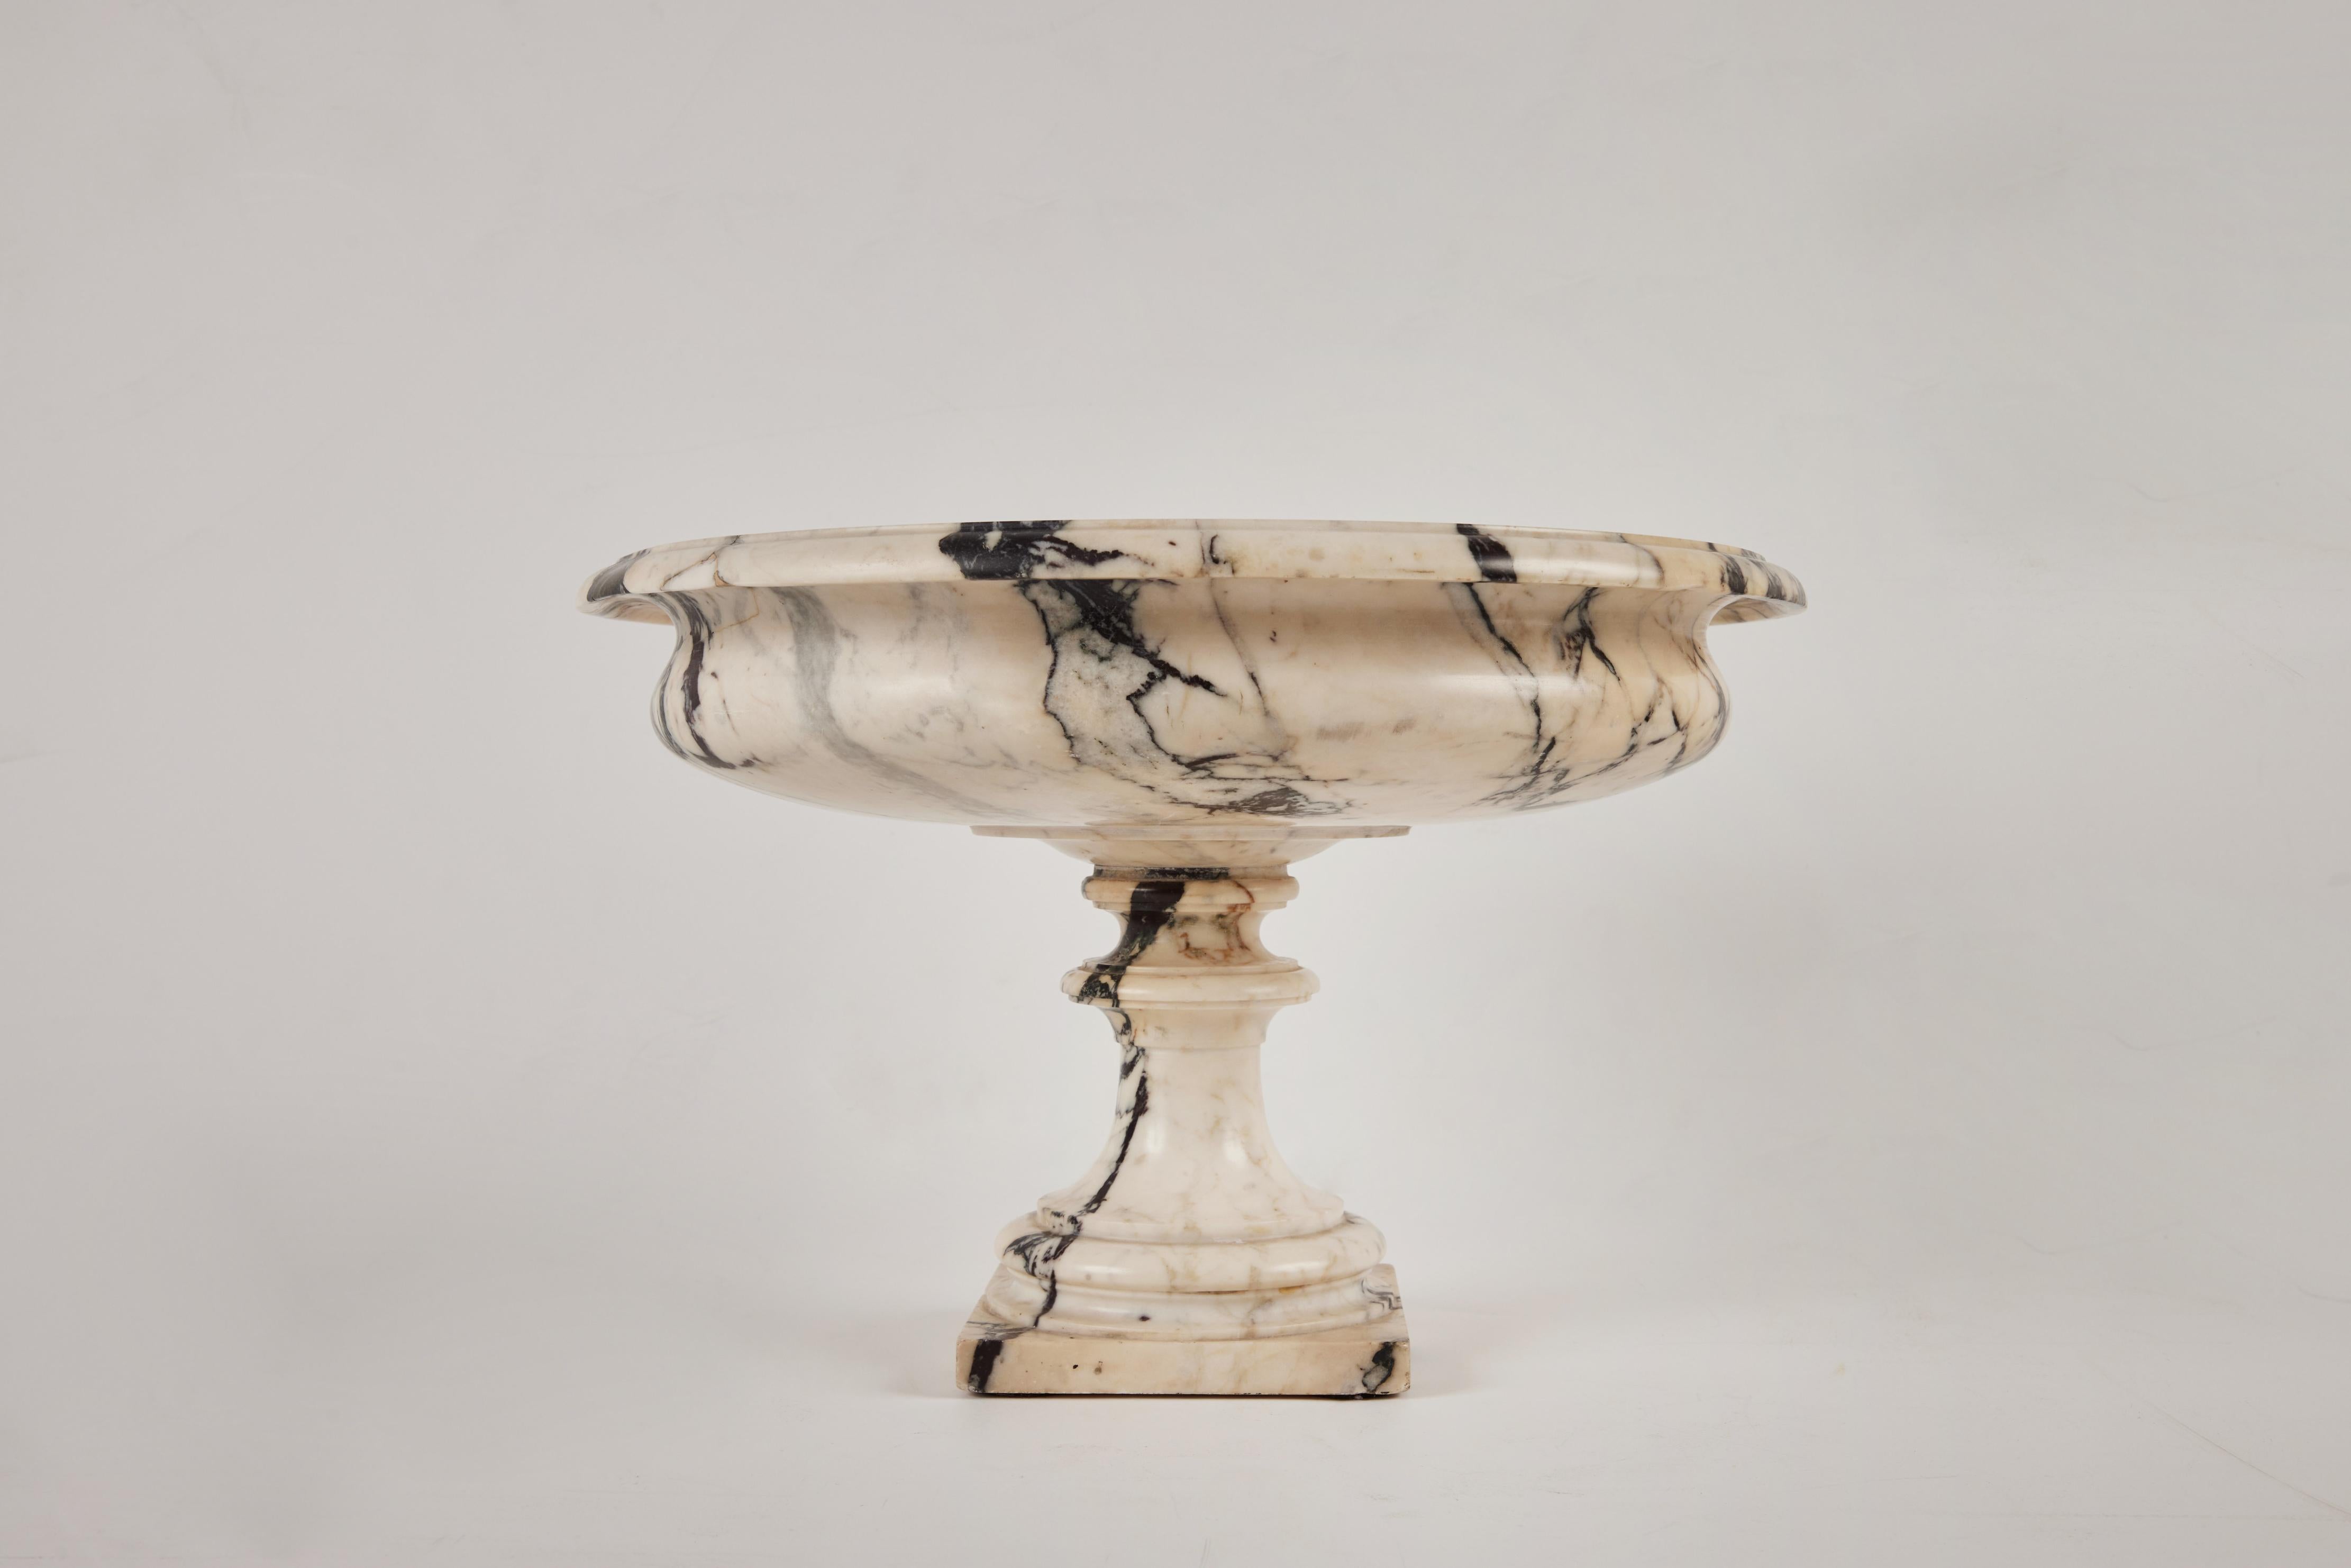 A beautiful veined marble Neoclassical tazza.